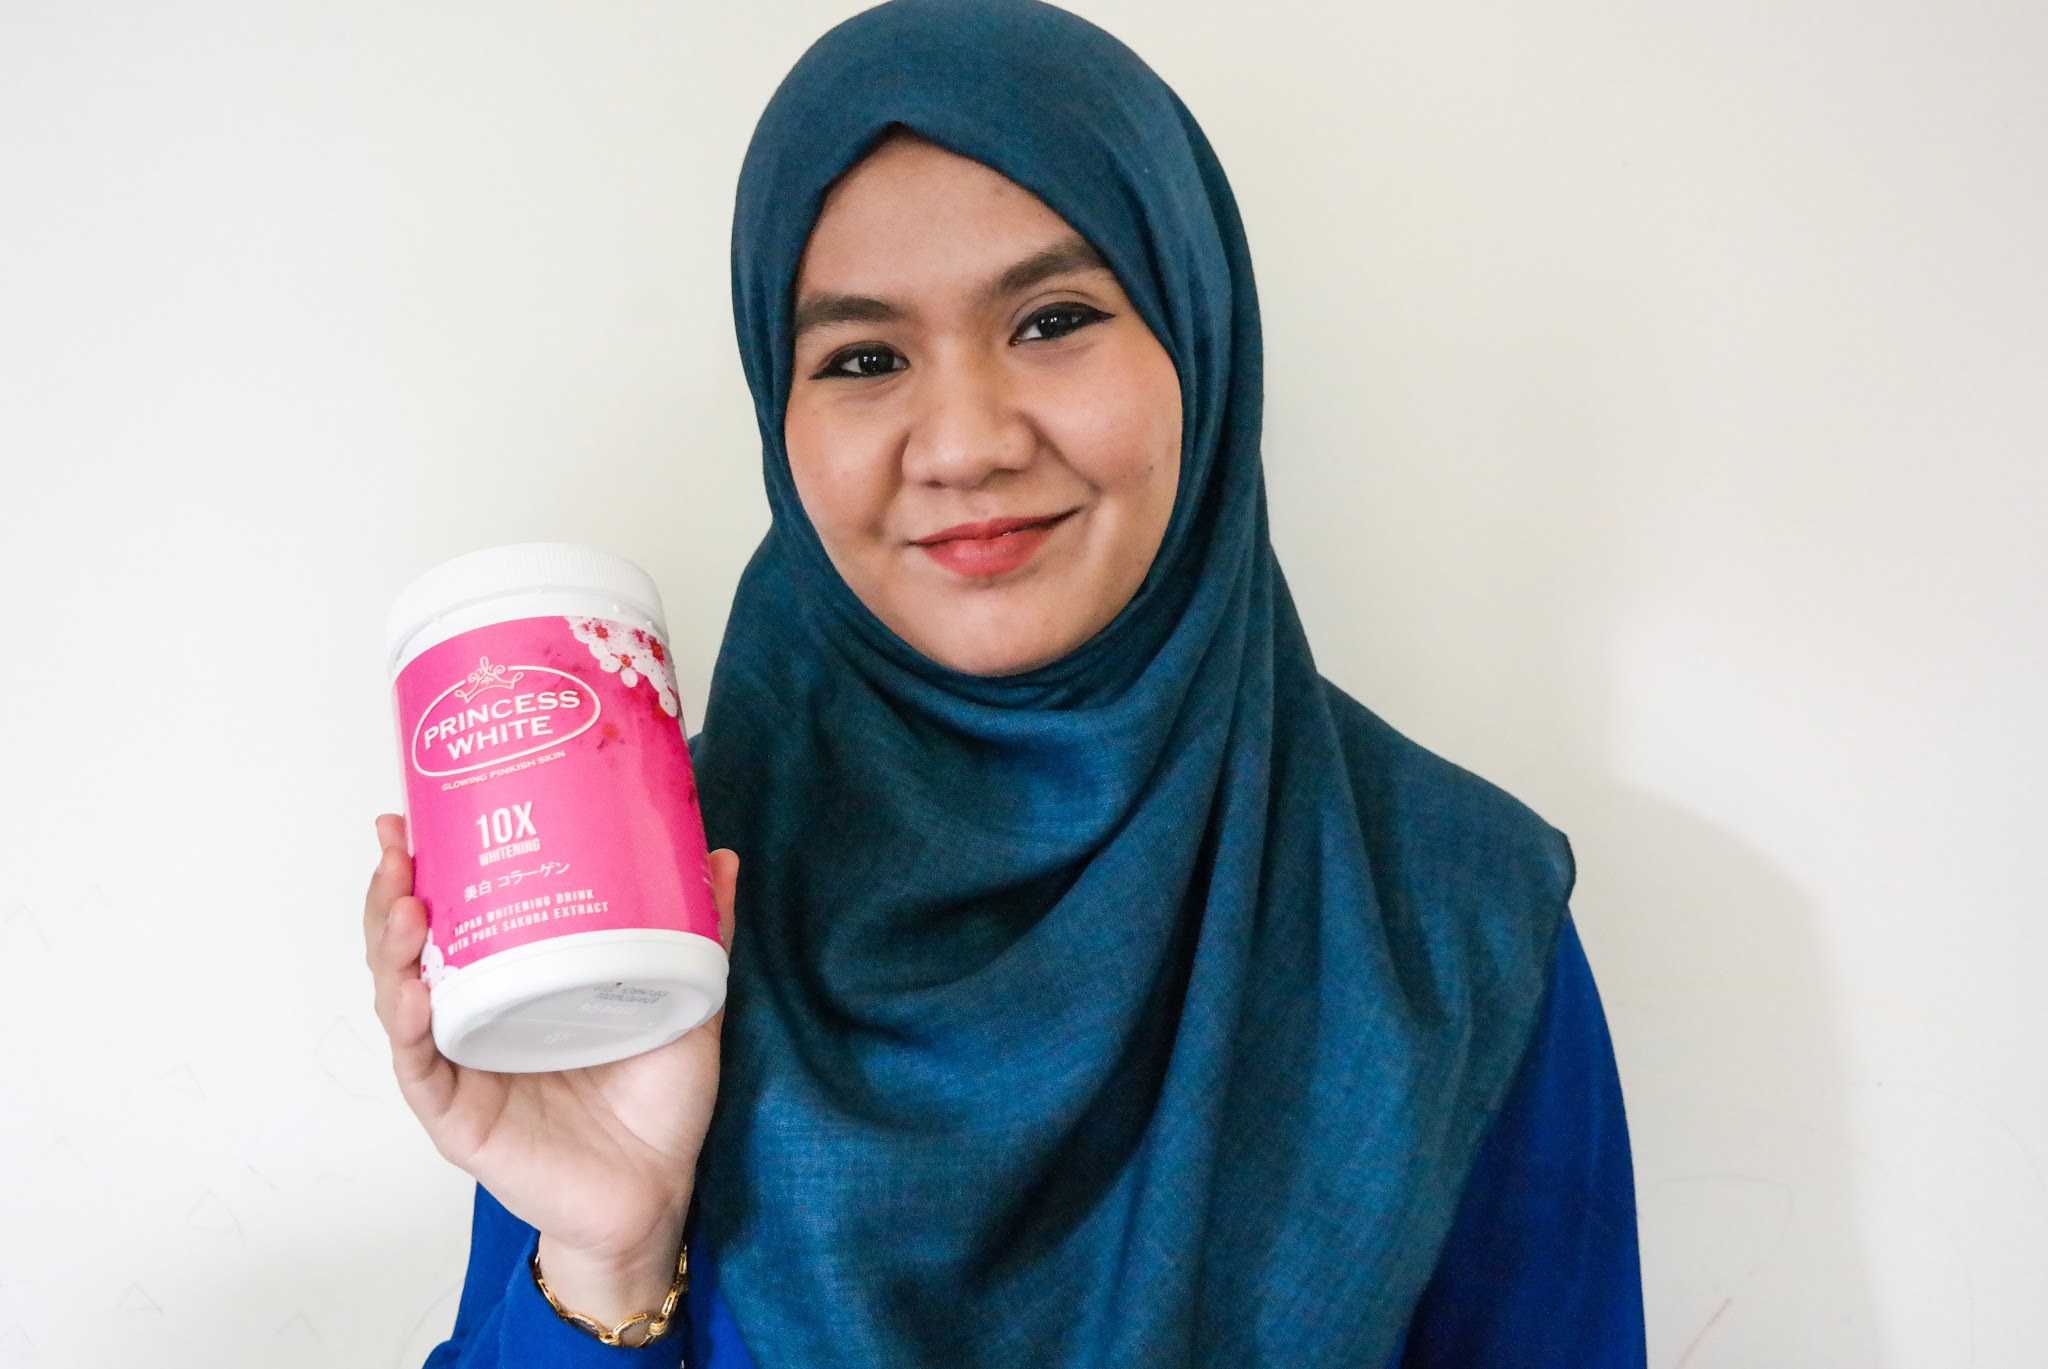 Princess White Drinks, Get the Glowing Pinkish Skin with Princess White, Princess White Whitening Drinks,testimoni Princess White Drinks,acai berry drink, whitening drink, malaysia most seller whitening drinks, malaysia top selling whitening drinks, supplement facts,